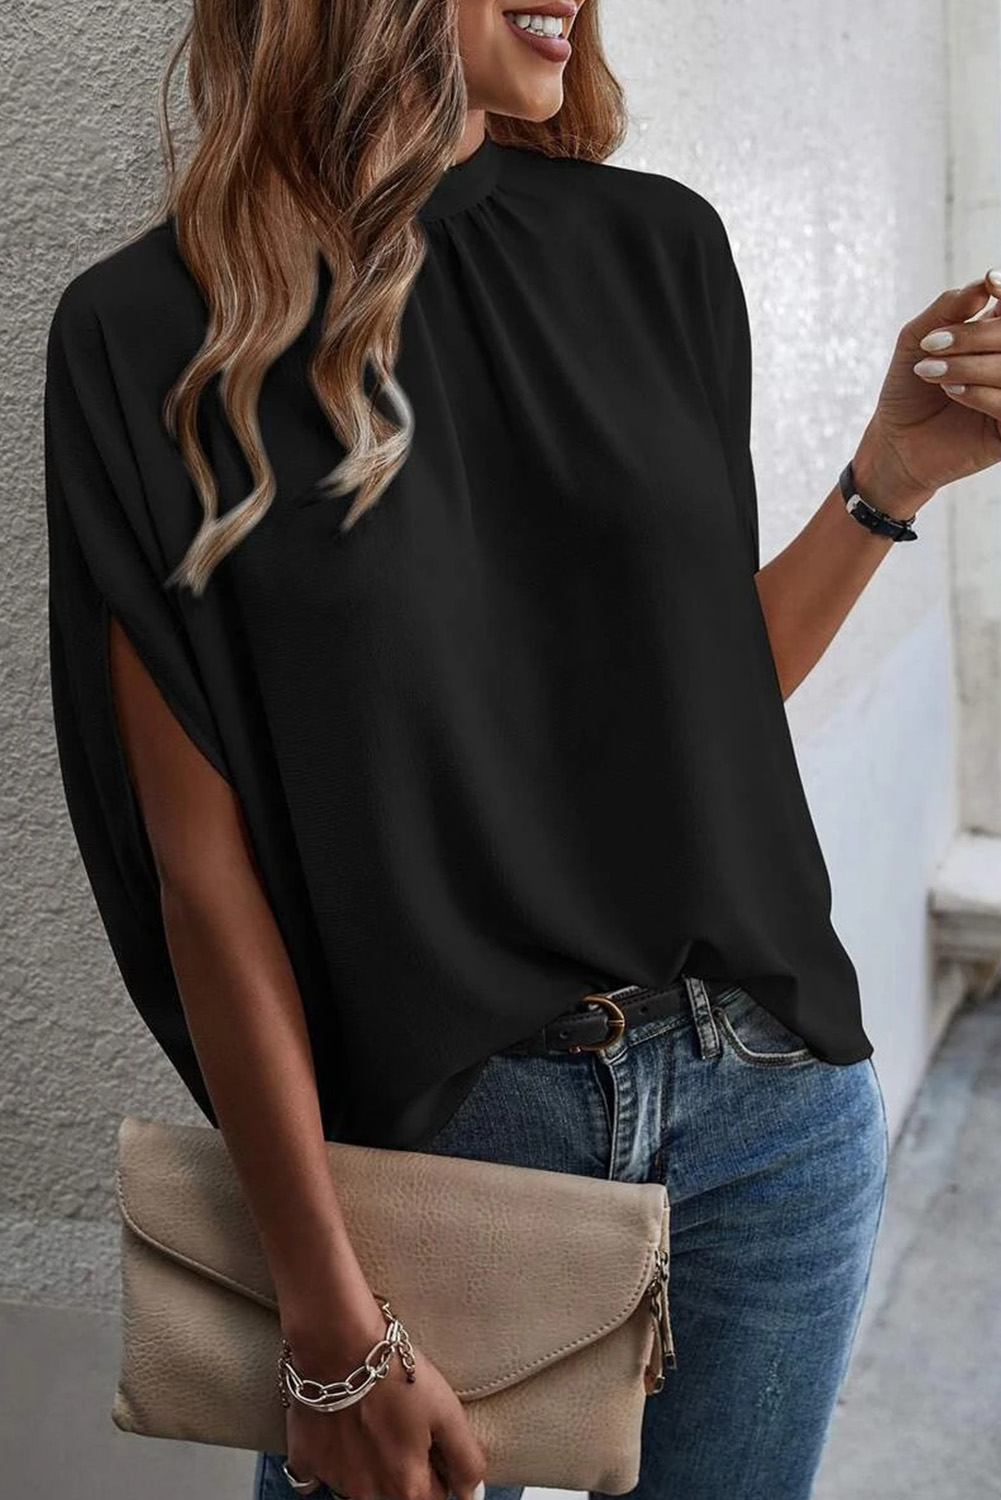 Shewin Wholesale Chic LADY Black Solid Color Batwing Sleeve Knotted Blouse